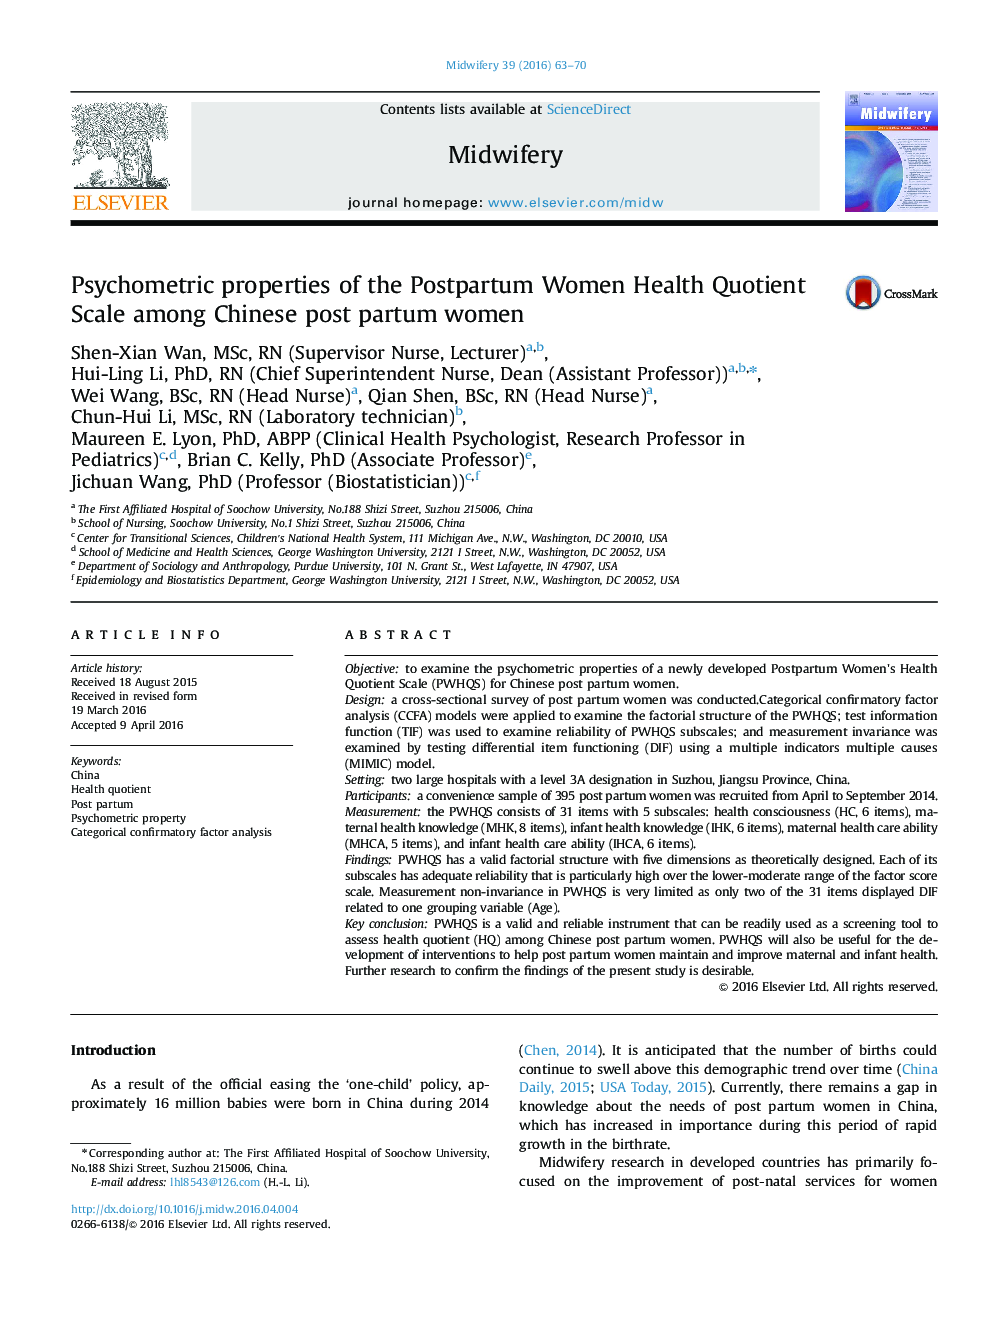 Psychometric properties of the Postpartum Women Health Quotient Scale among Chinese post partum women